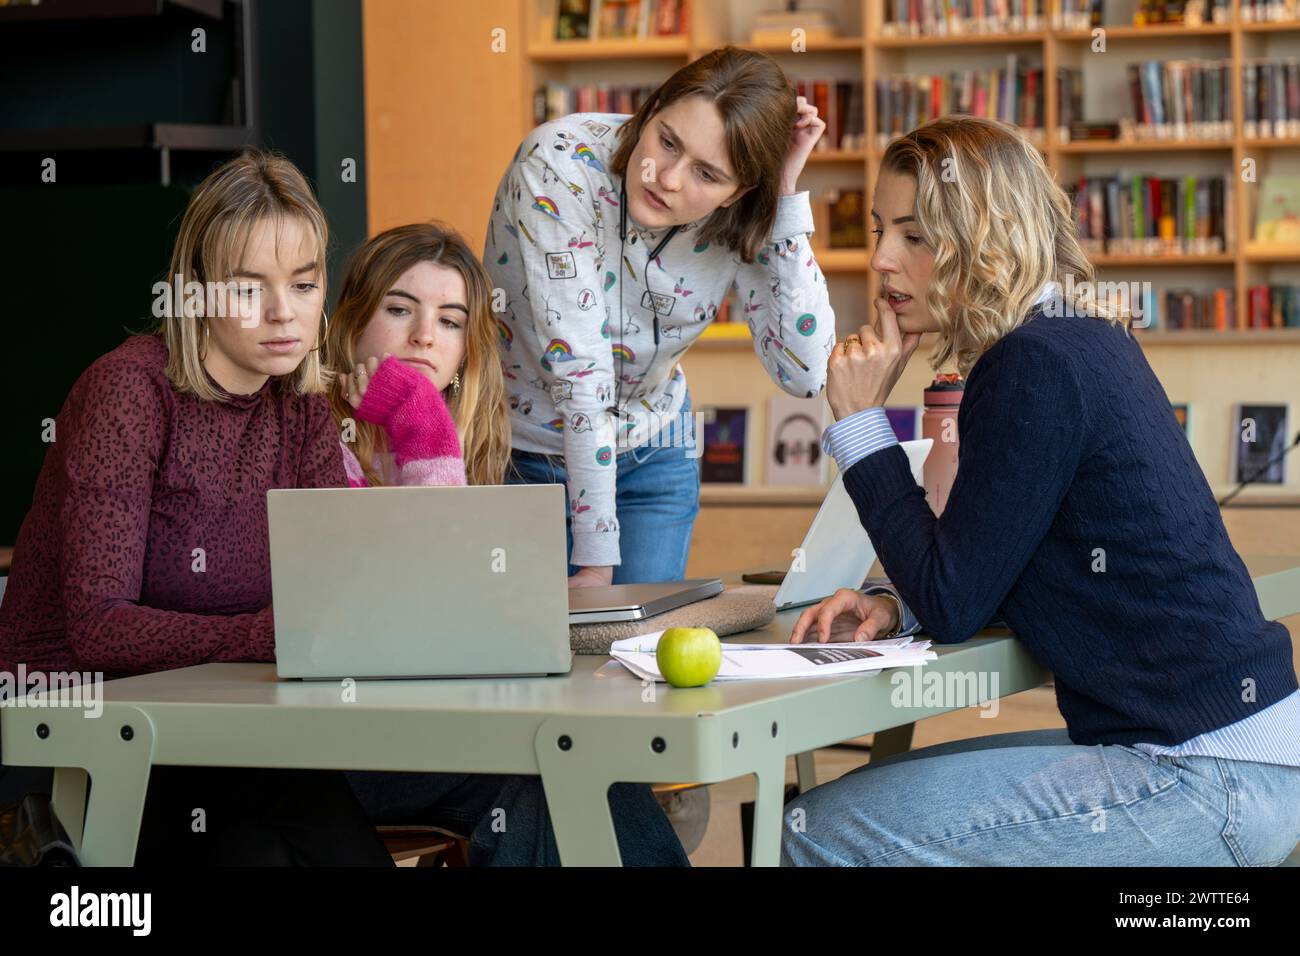 A group of four young women focused on a laptop screen while seated at a table with books, papers, and an apple, suggesting a study or work session. Stock Photo